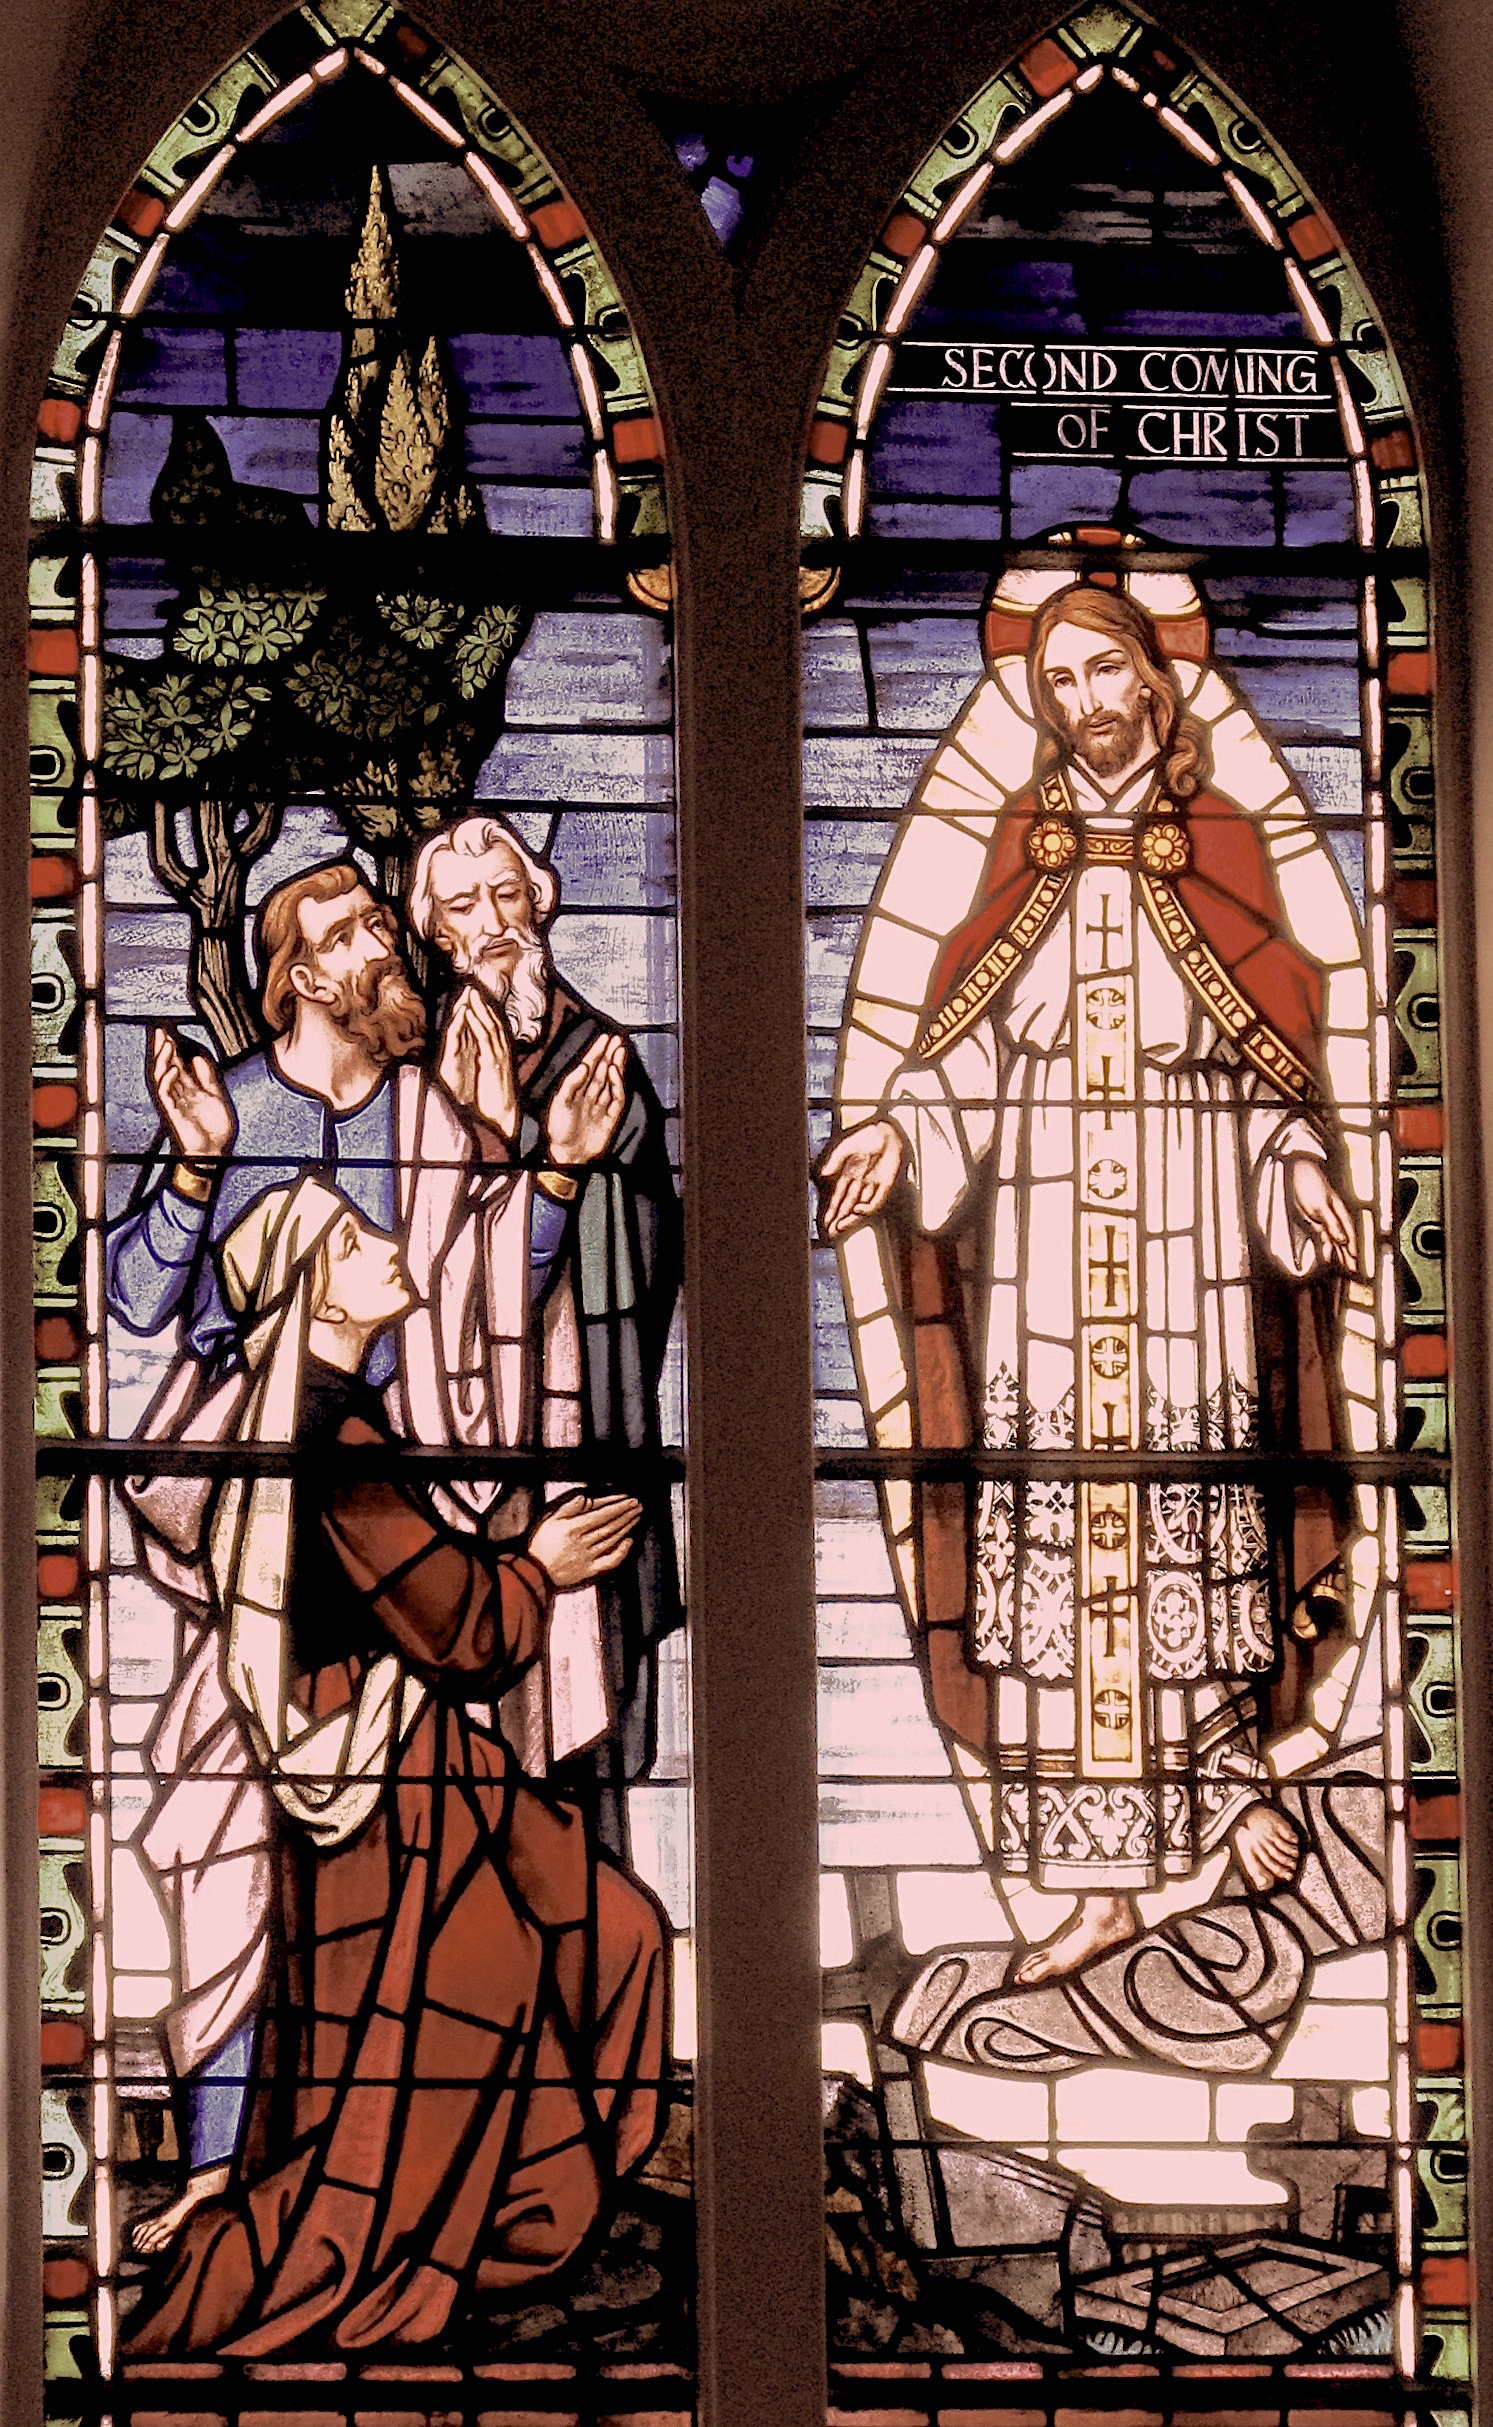 St. Matthew's German Evangelical Lutheran Church,
The Second Coming of Christ, stained glass window